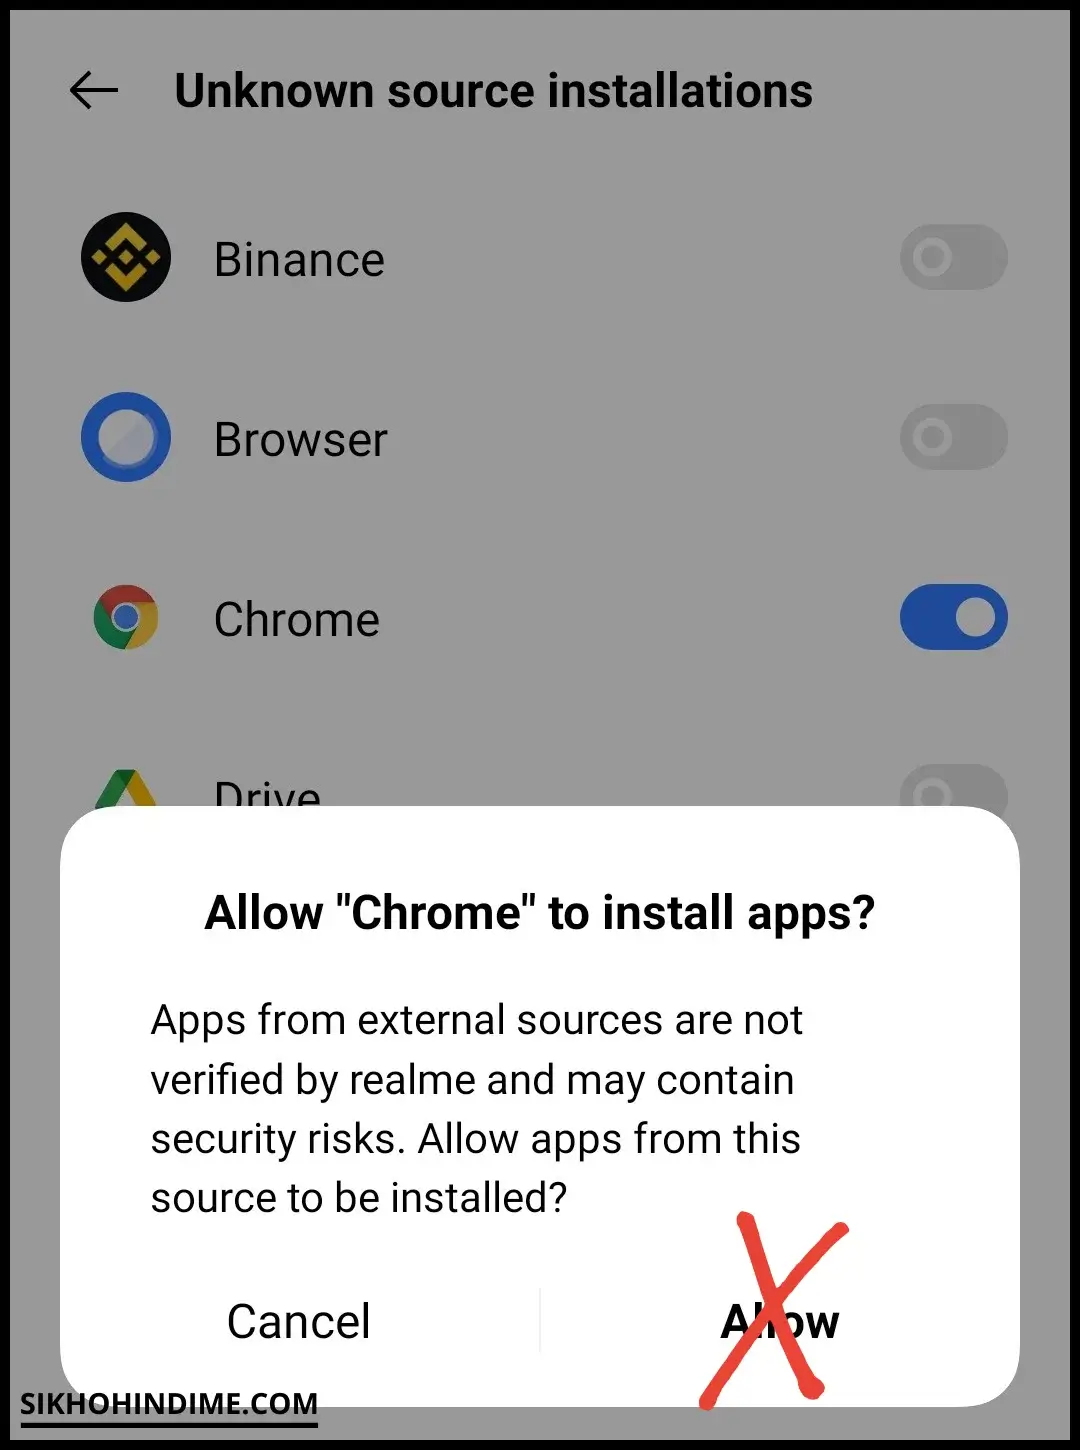 Don't install apps from unknown sources